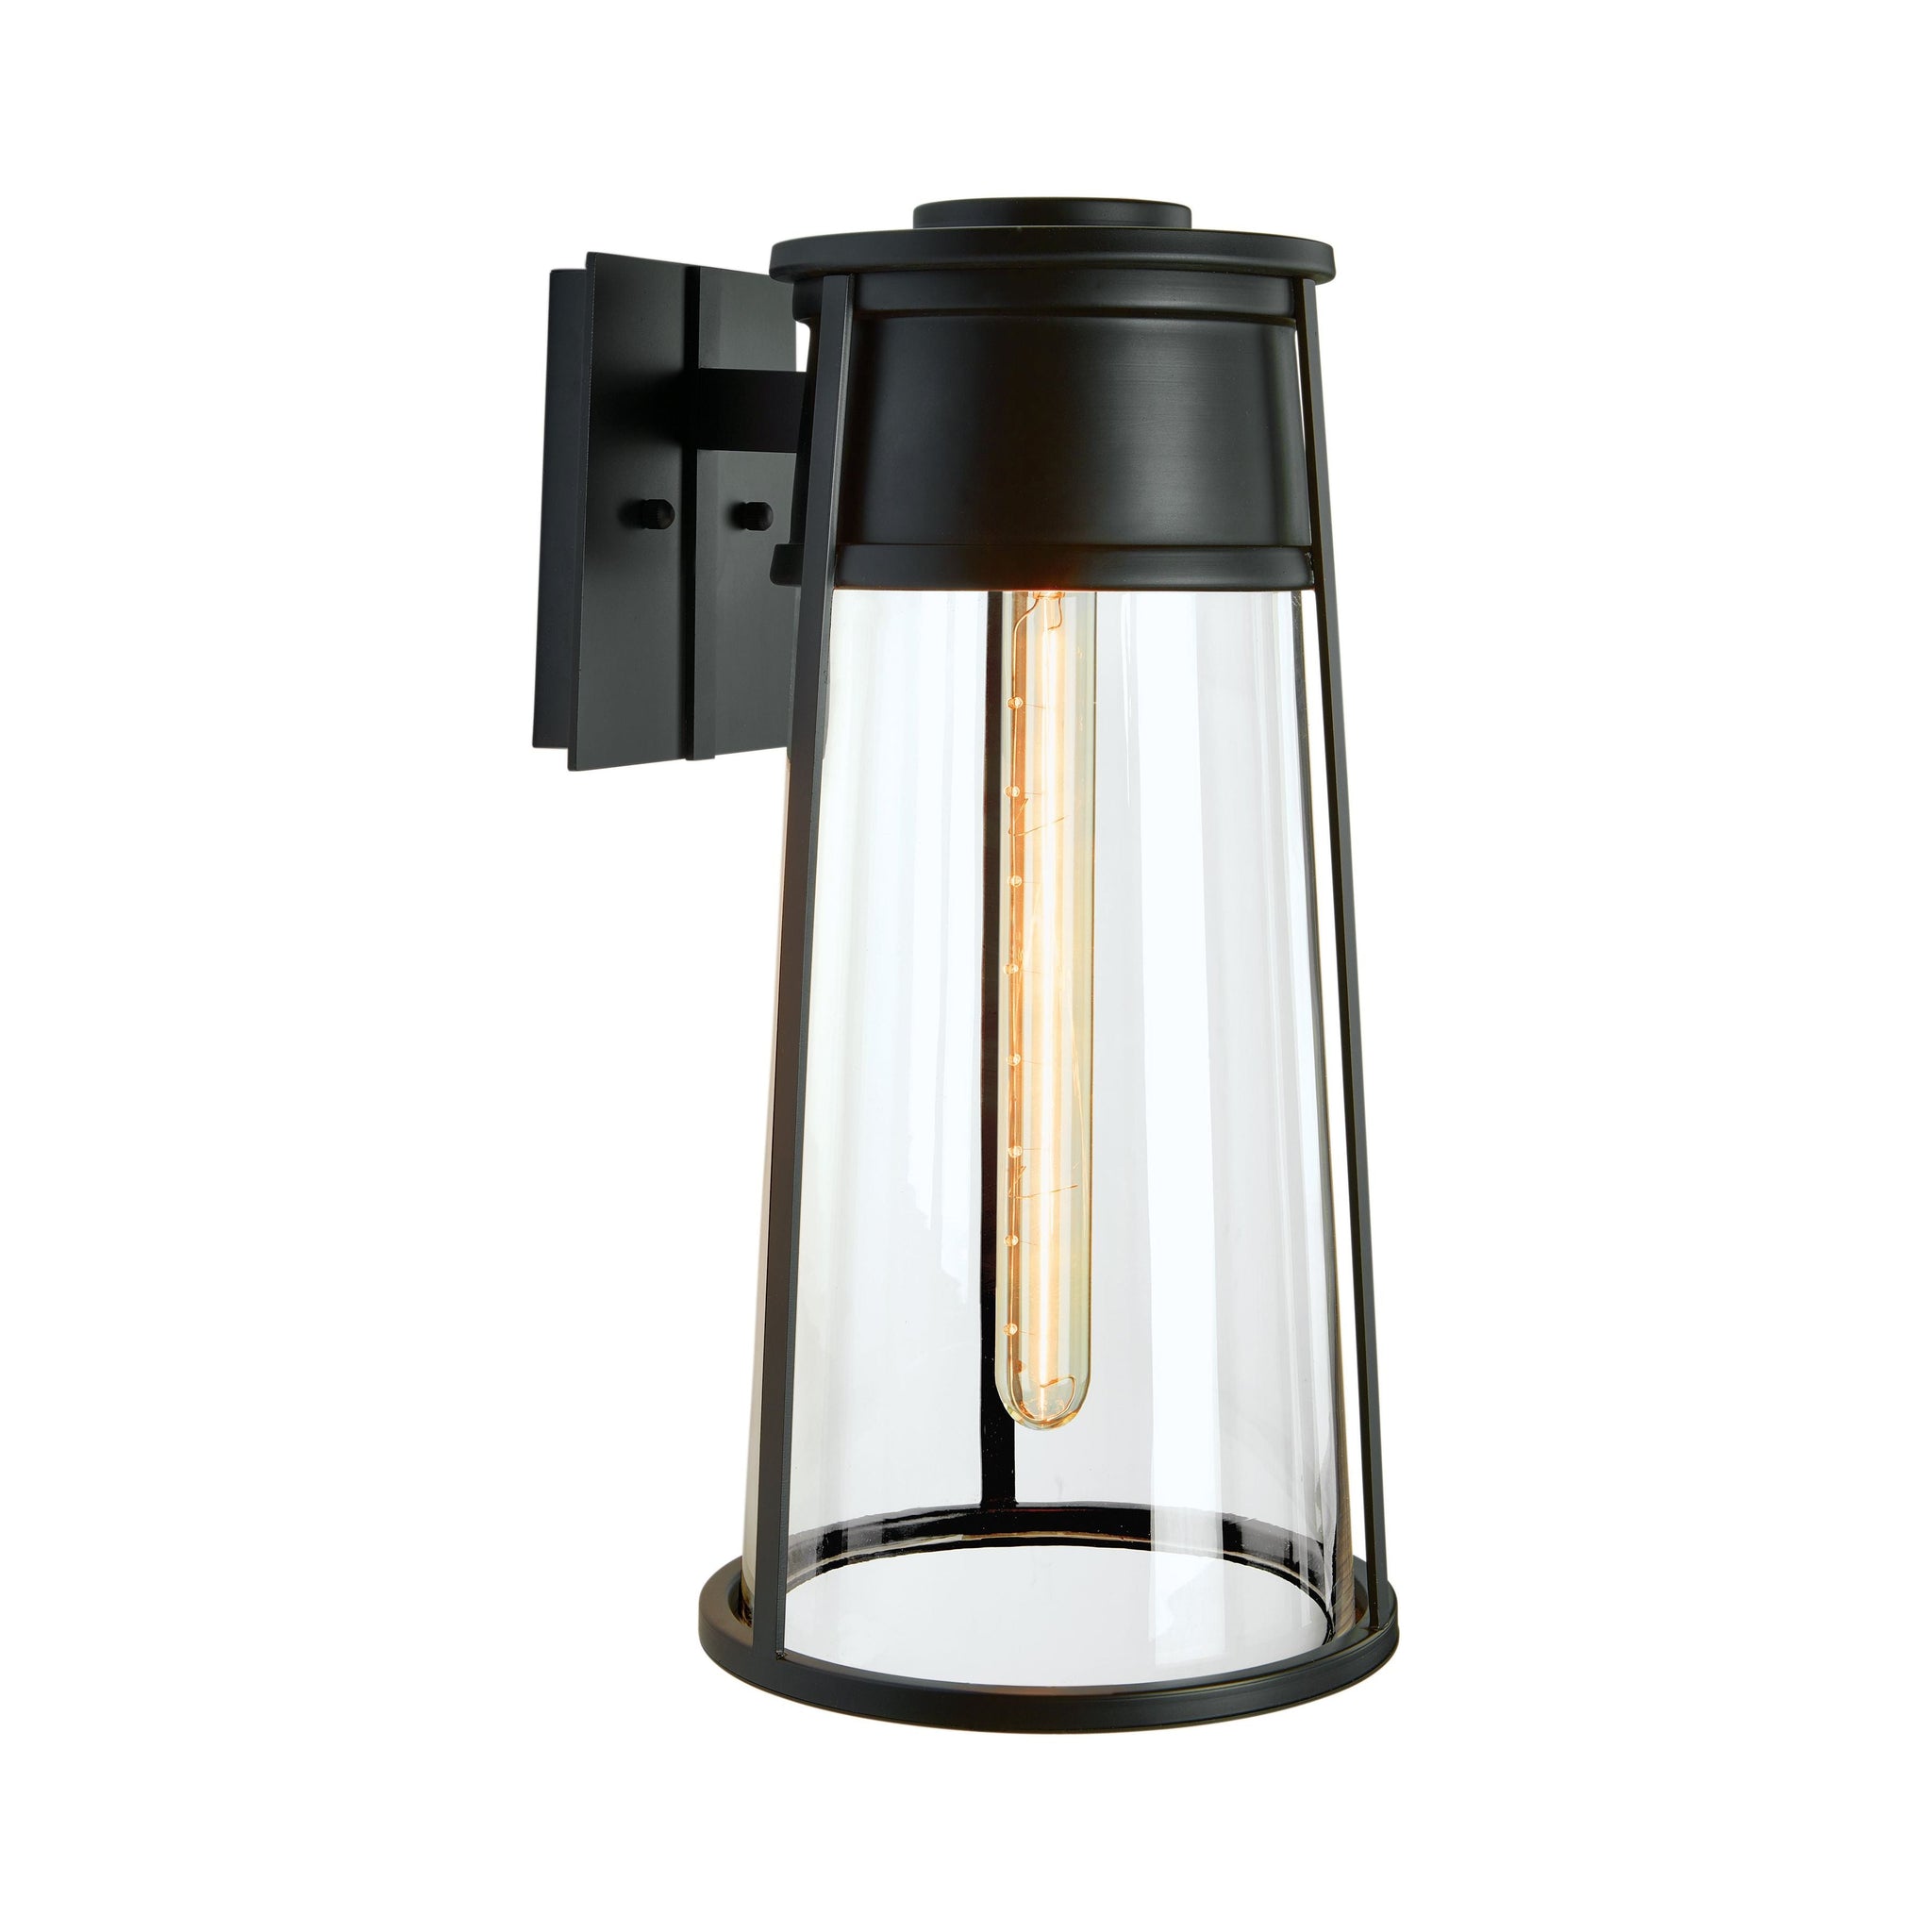 Cone Outdoor Wall Light